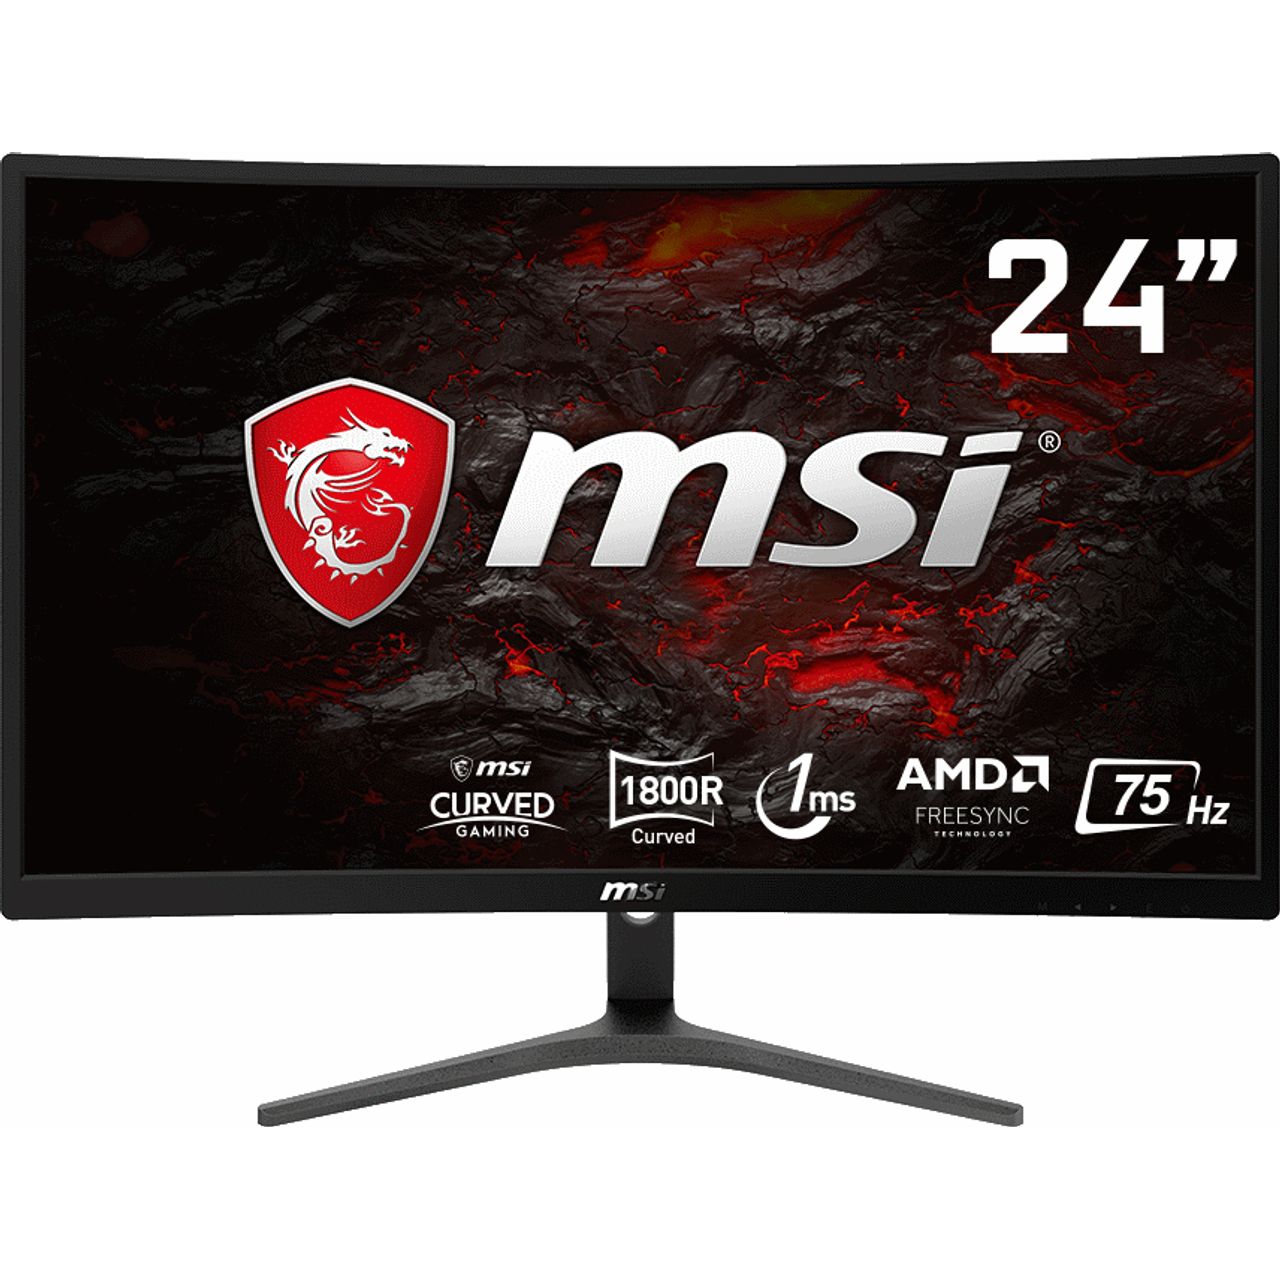 MSI Optix G241VC Full HD 75Hz Curved Gaming Monitor with AMD FreeSync Review